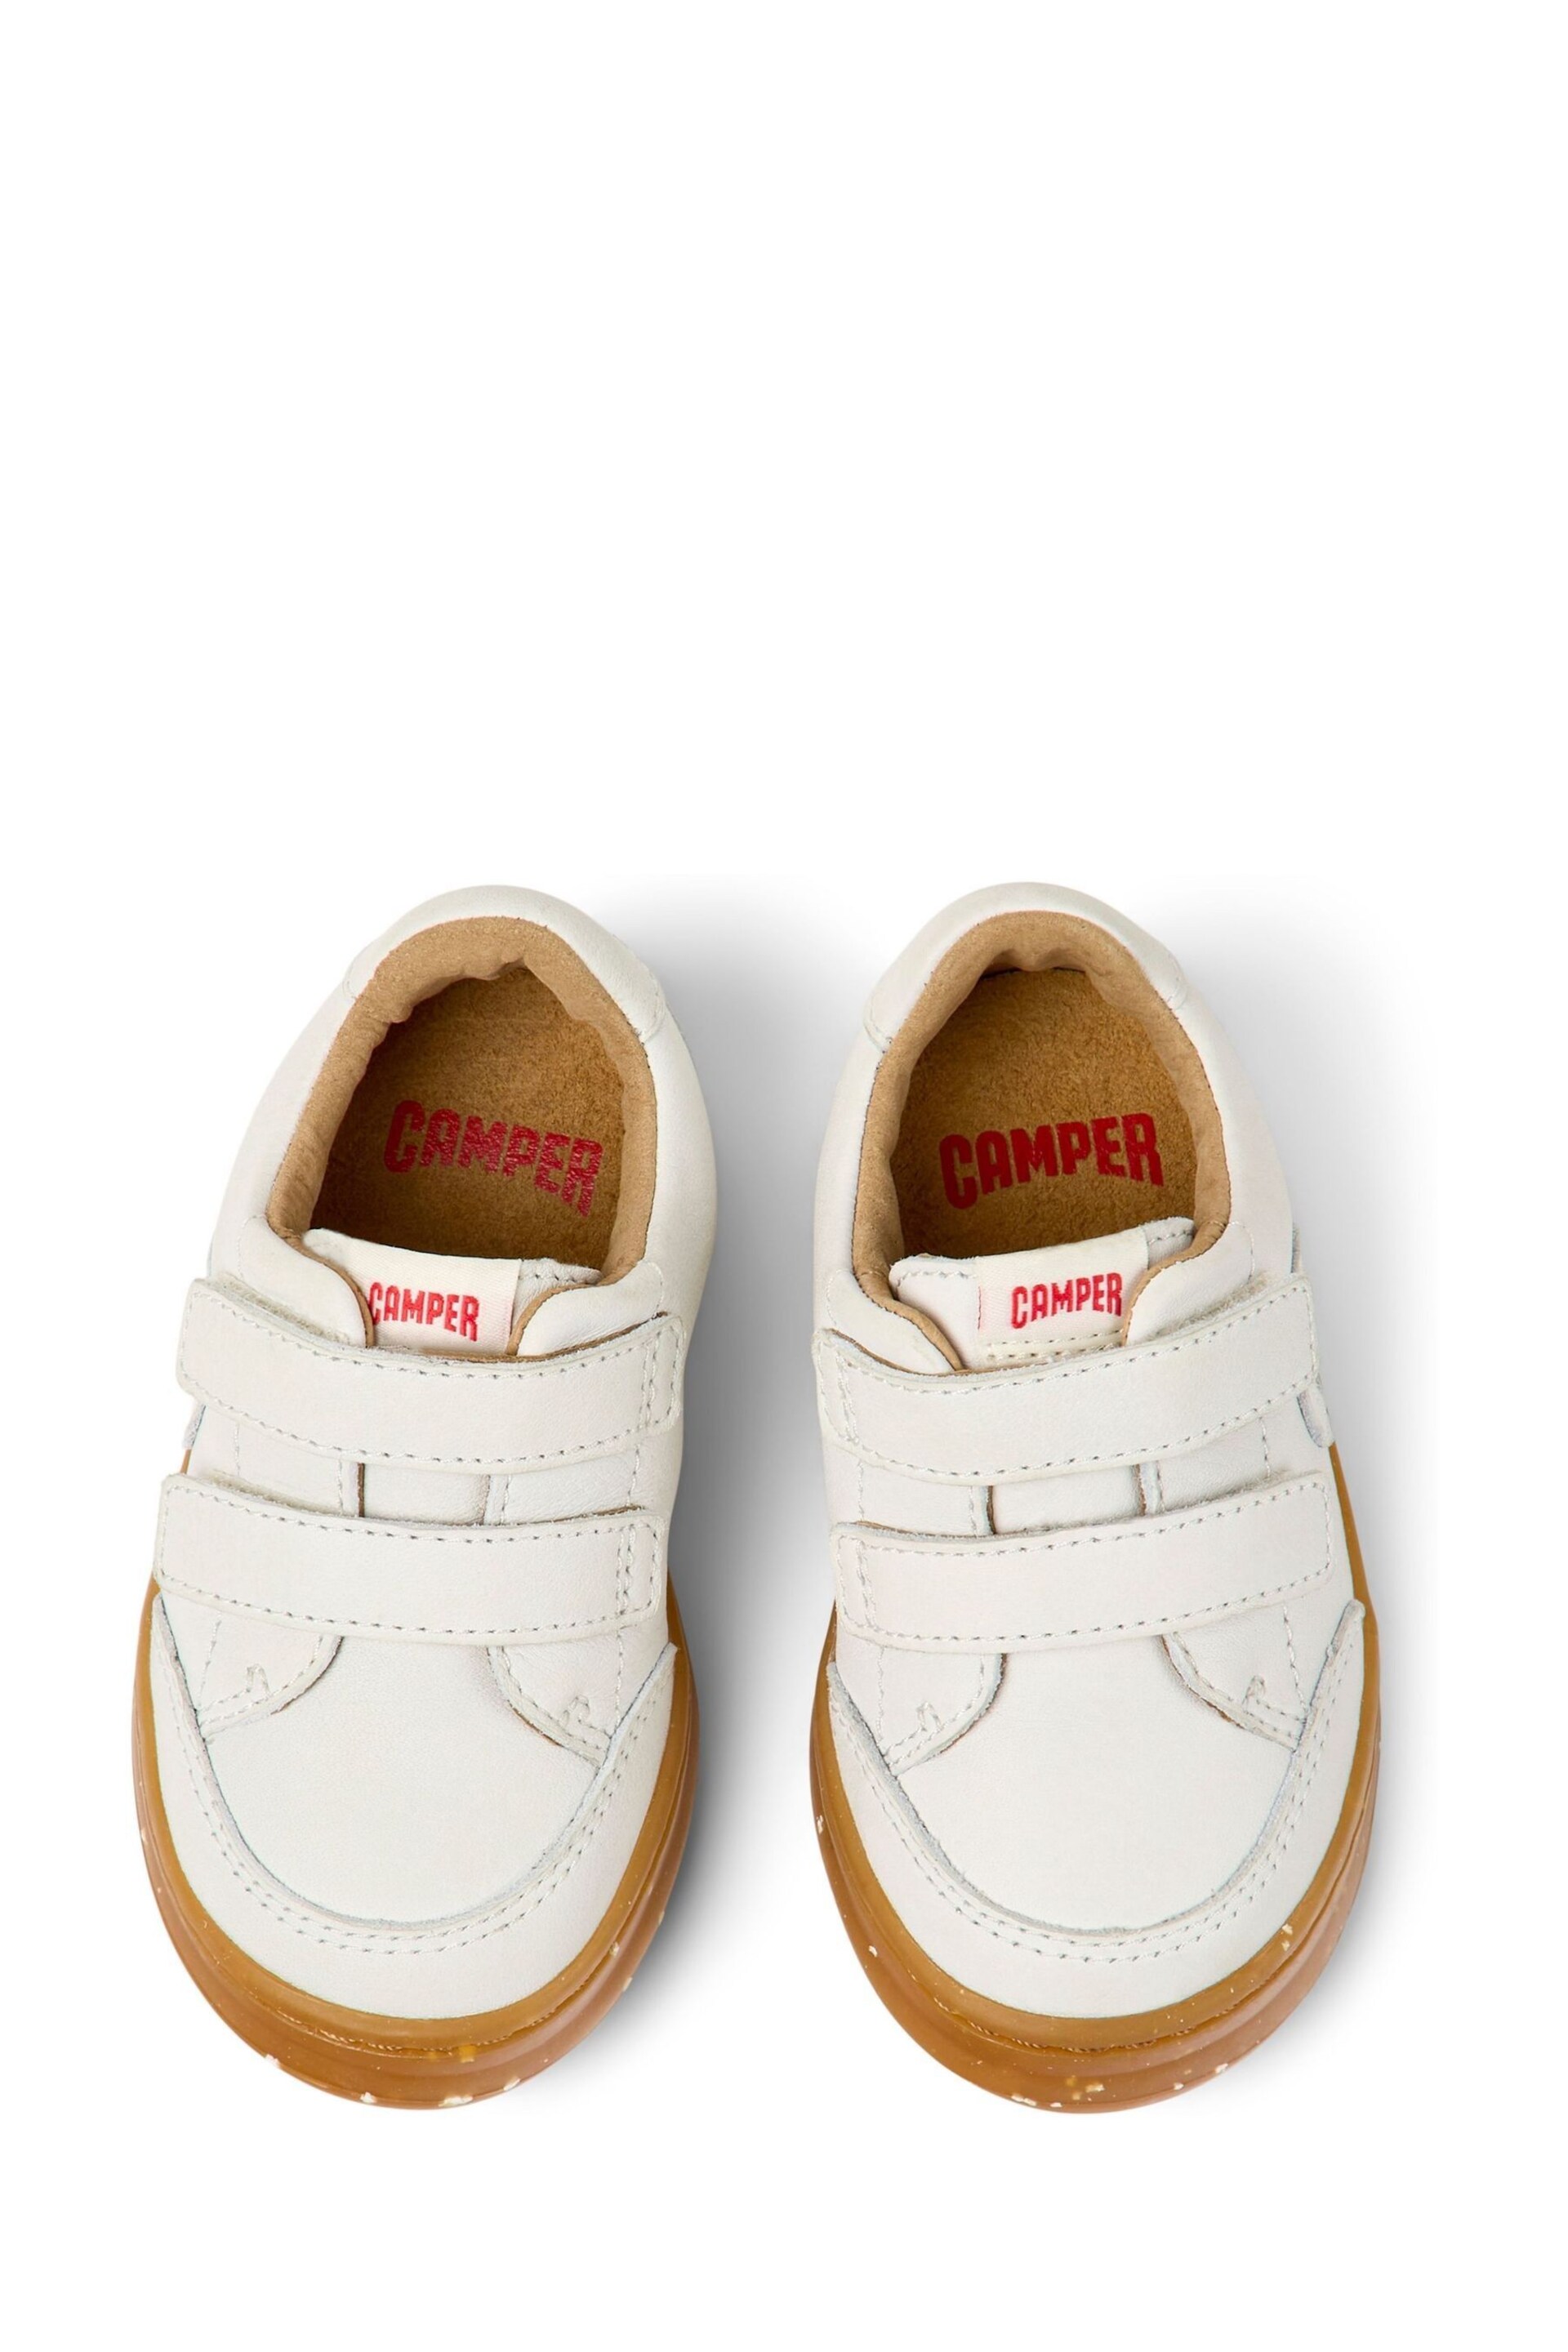 Runner Four First Walkers Non Dyed White Leather Sneakers - Image 4 of 5